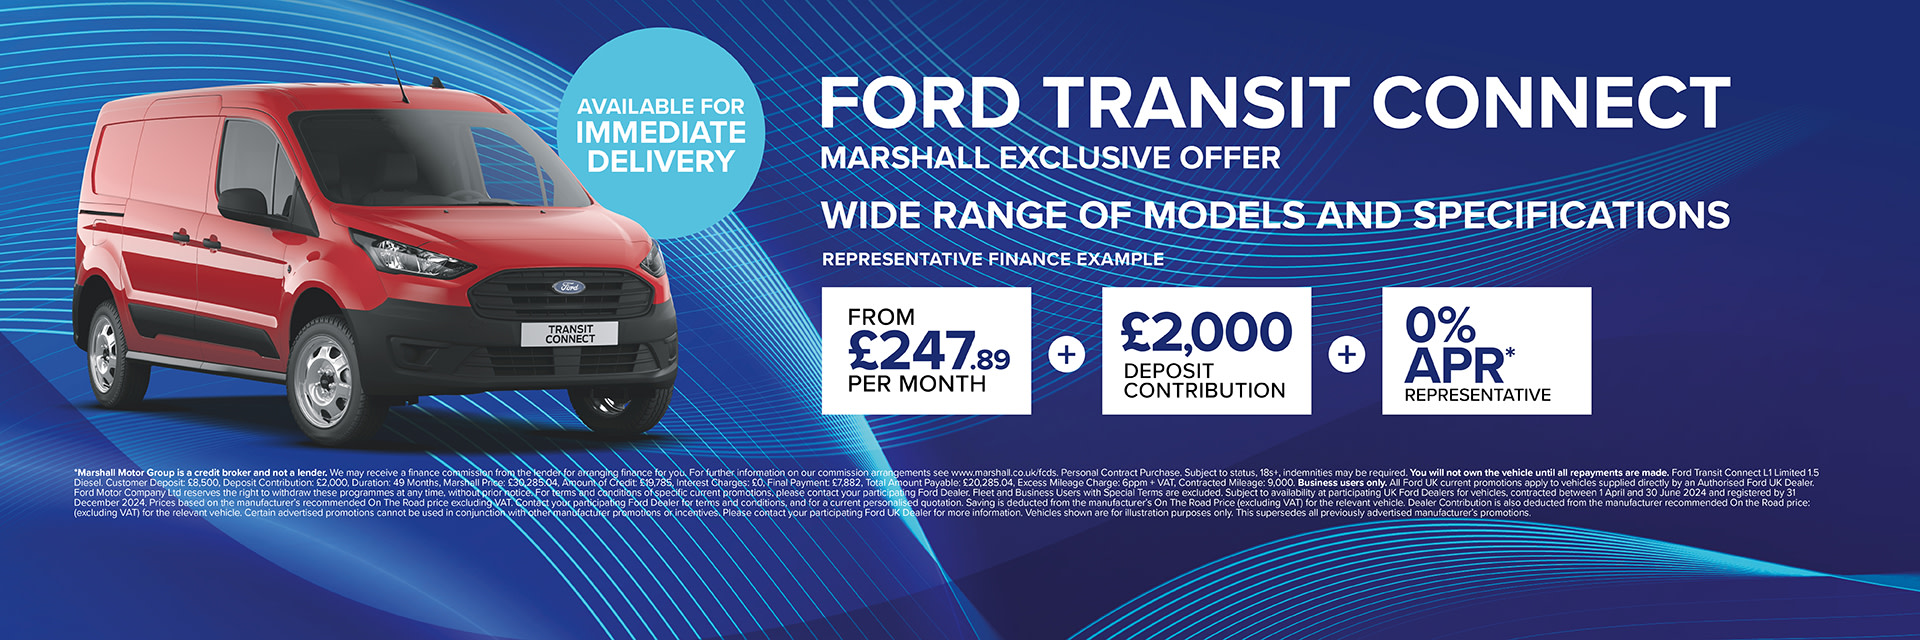 FORD TRANSIT CONNECT PERSONAL CONTRACT PURCHASE OFFER 